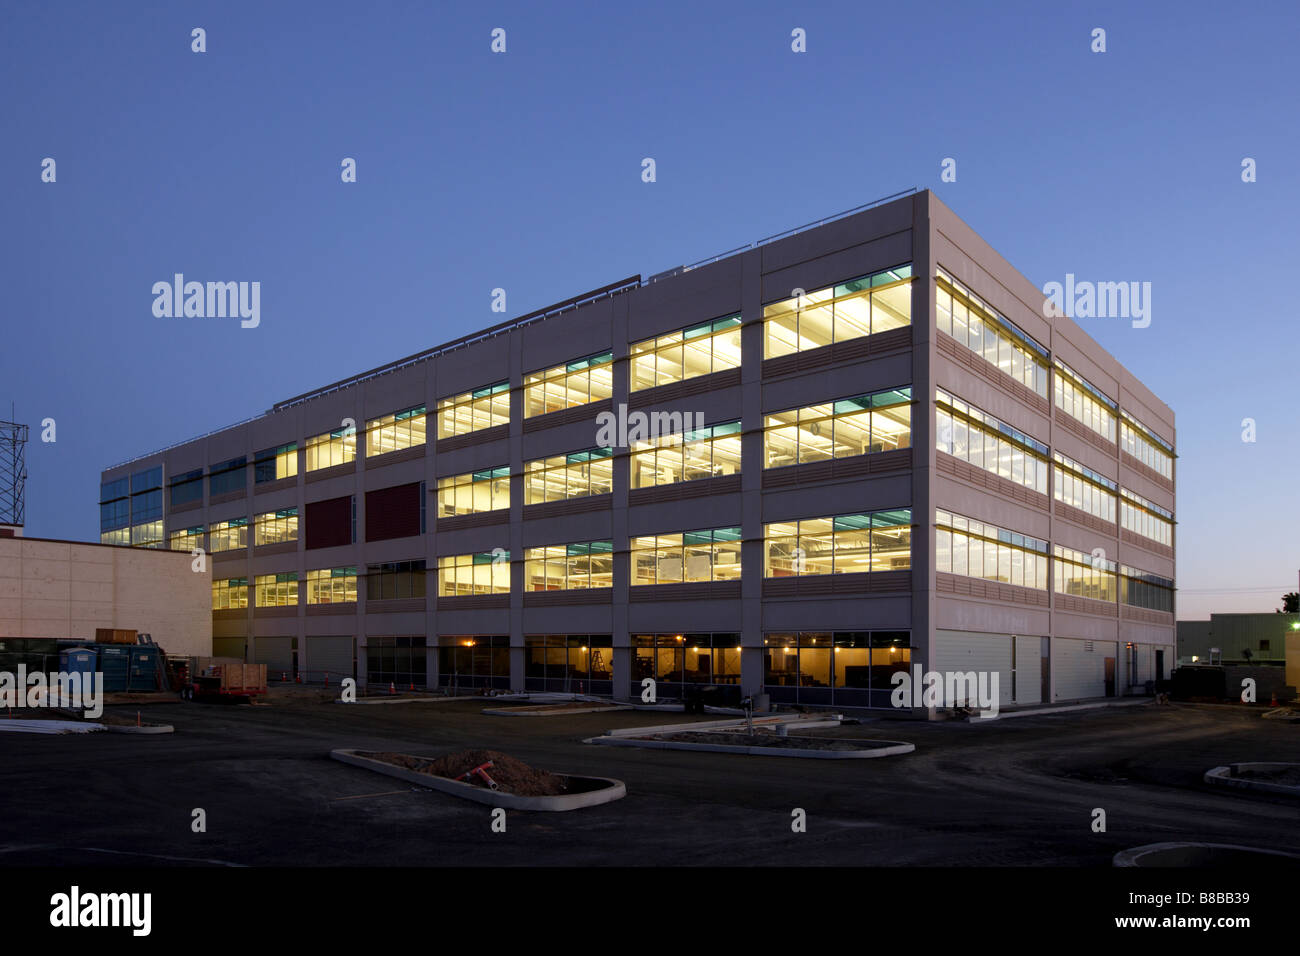 An office building with a empty parking lot Stock Photo